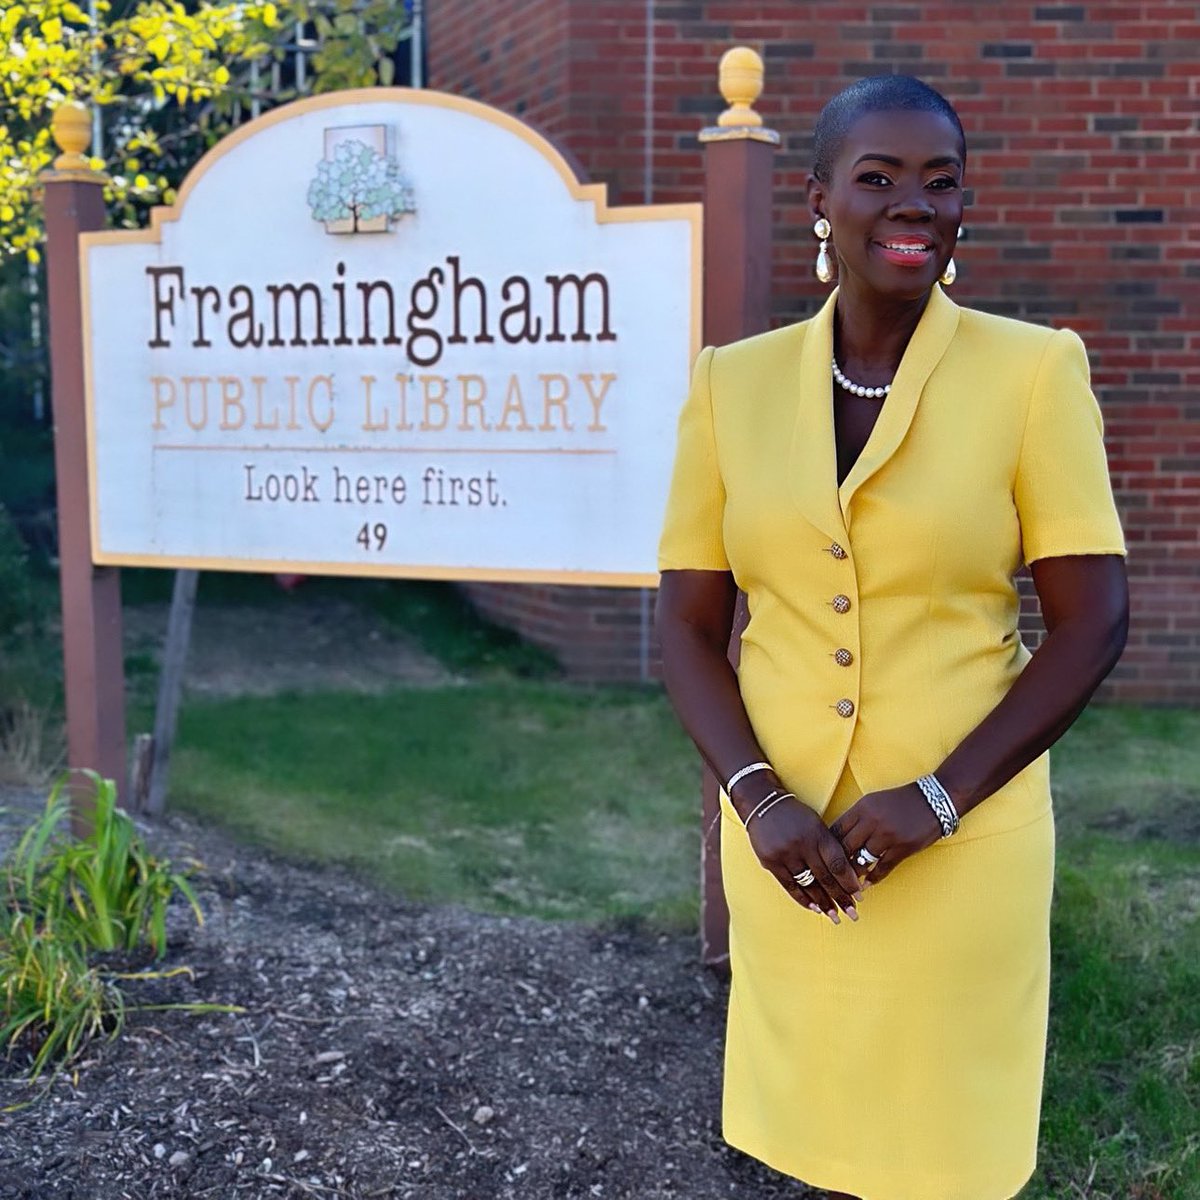 I would be honored to represent you on the #FraminghamLibrary Board of Trustees. My #vision is to work with the director, the staff, and the board to boost our library’s visibility, engage our diverse community, and to ensure everyone knows the vast resources available #VoteForMe